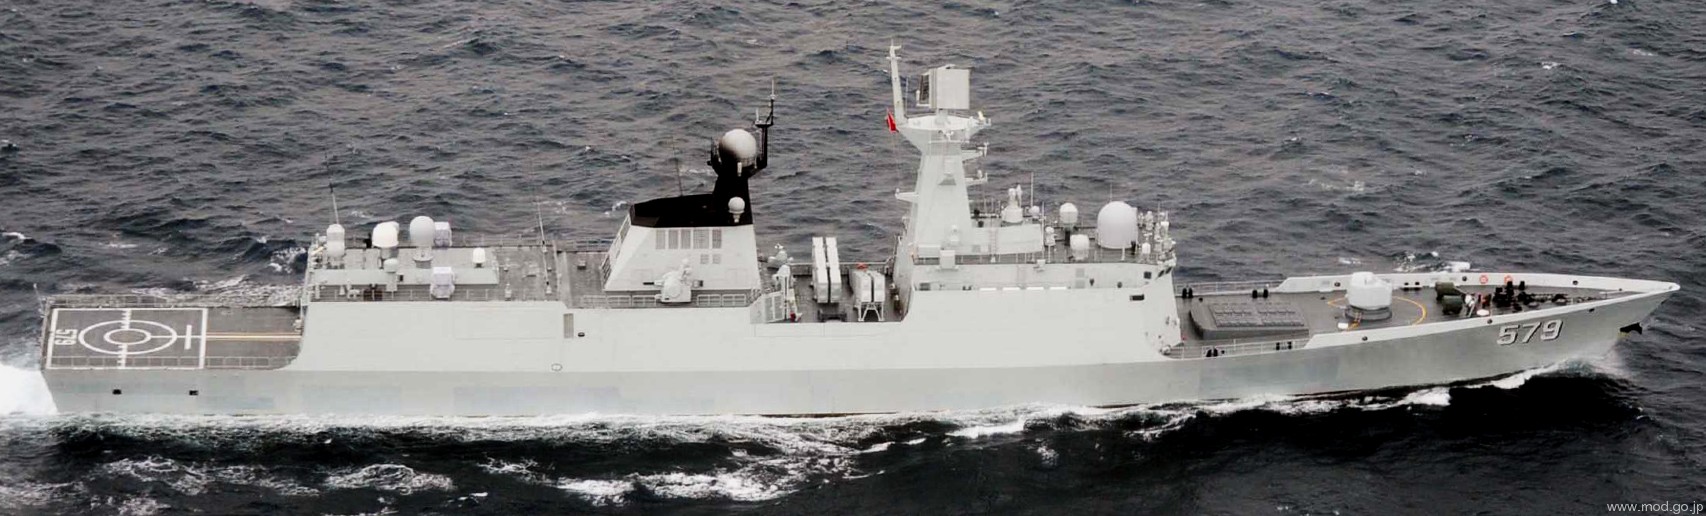 ffg-579 plans handan type 054a jiangkai ii class guided missile frigate china people's liberation army navy 03